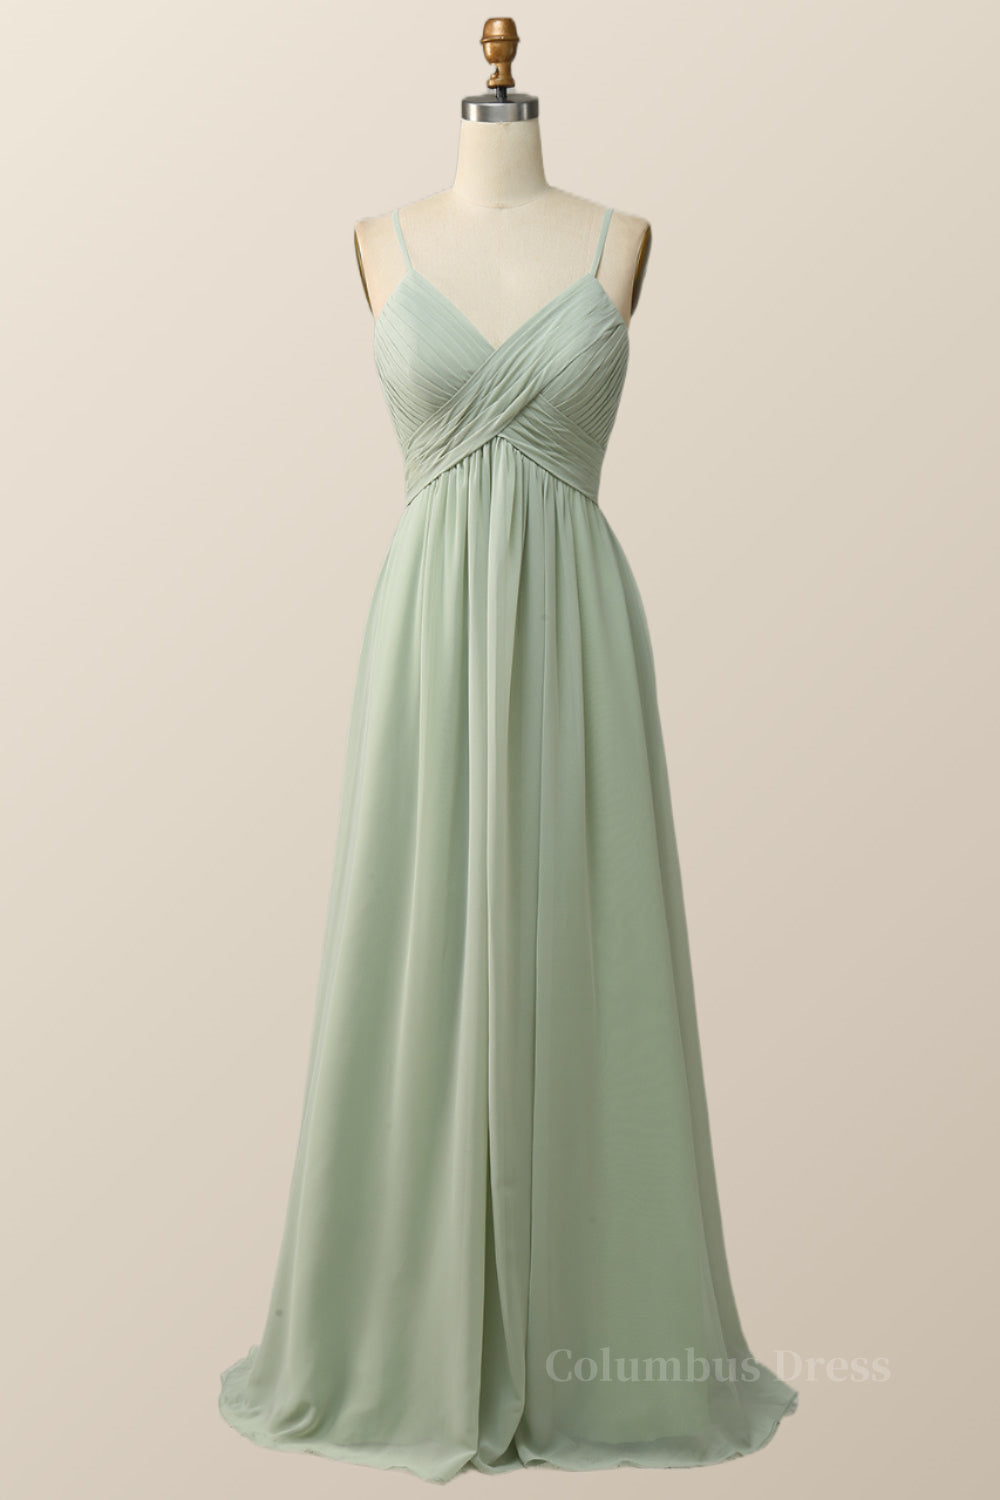 Prom Dresses With Shorts Underneath, Sage Green Pleated Straps Long Bridesmaid Dress